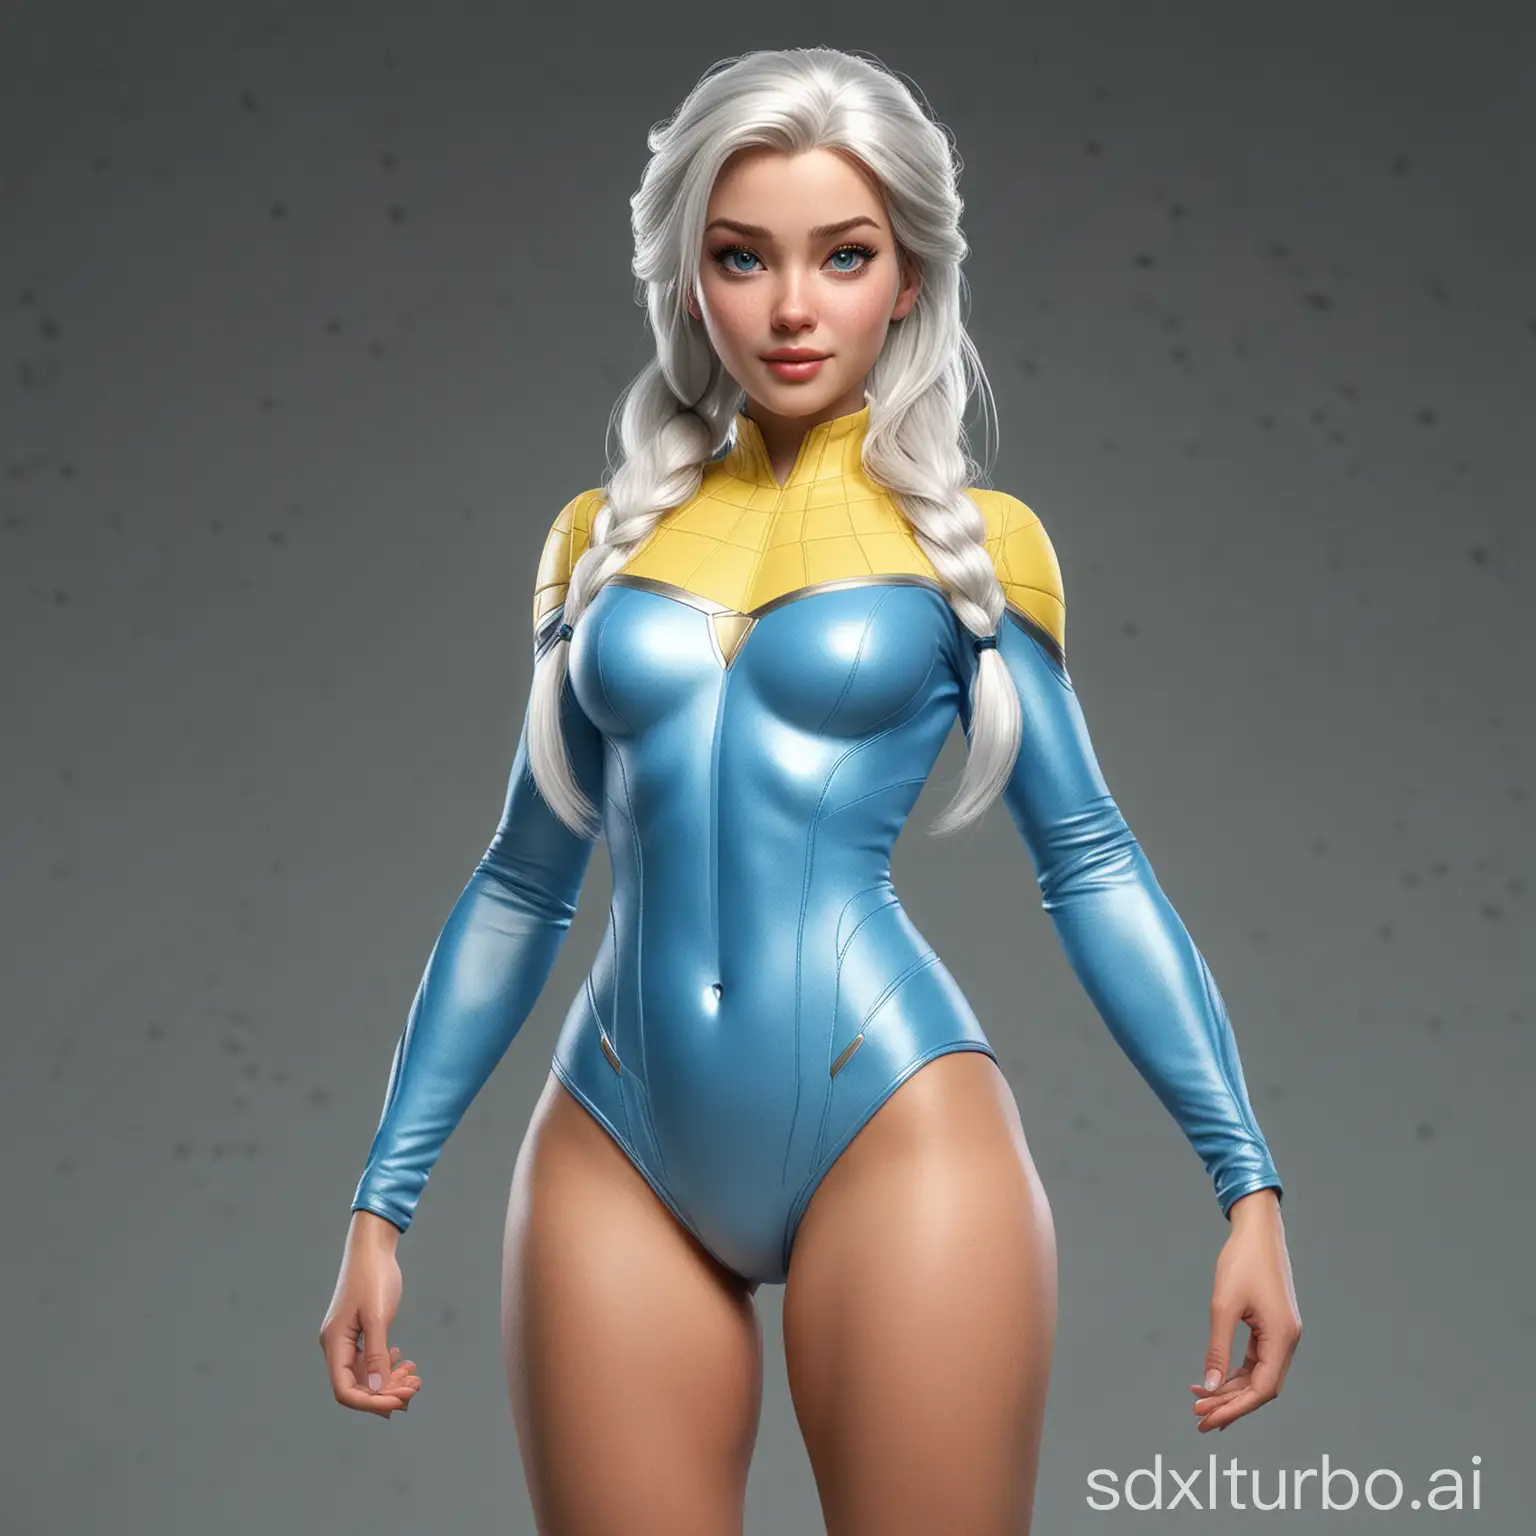 Realistic-Elsa-Cosplay-with-XMen-Tight-Uniform-and-Curvy-Figure